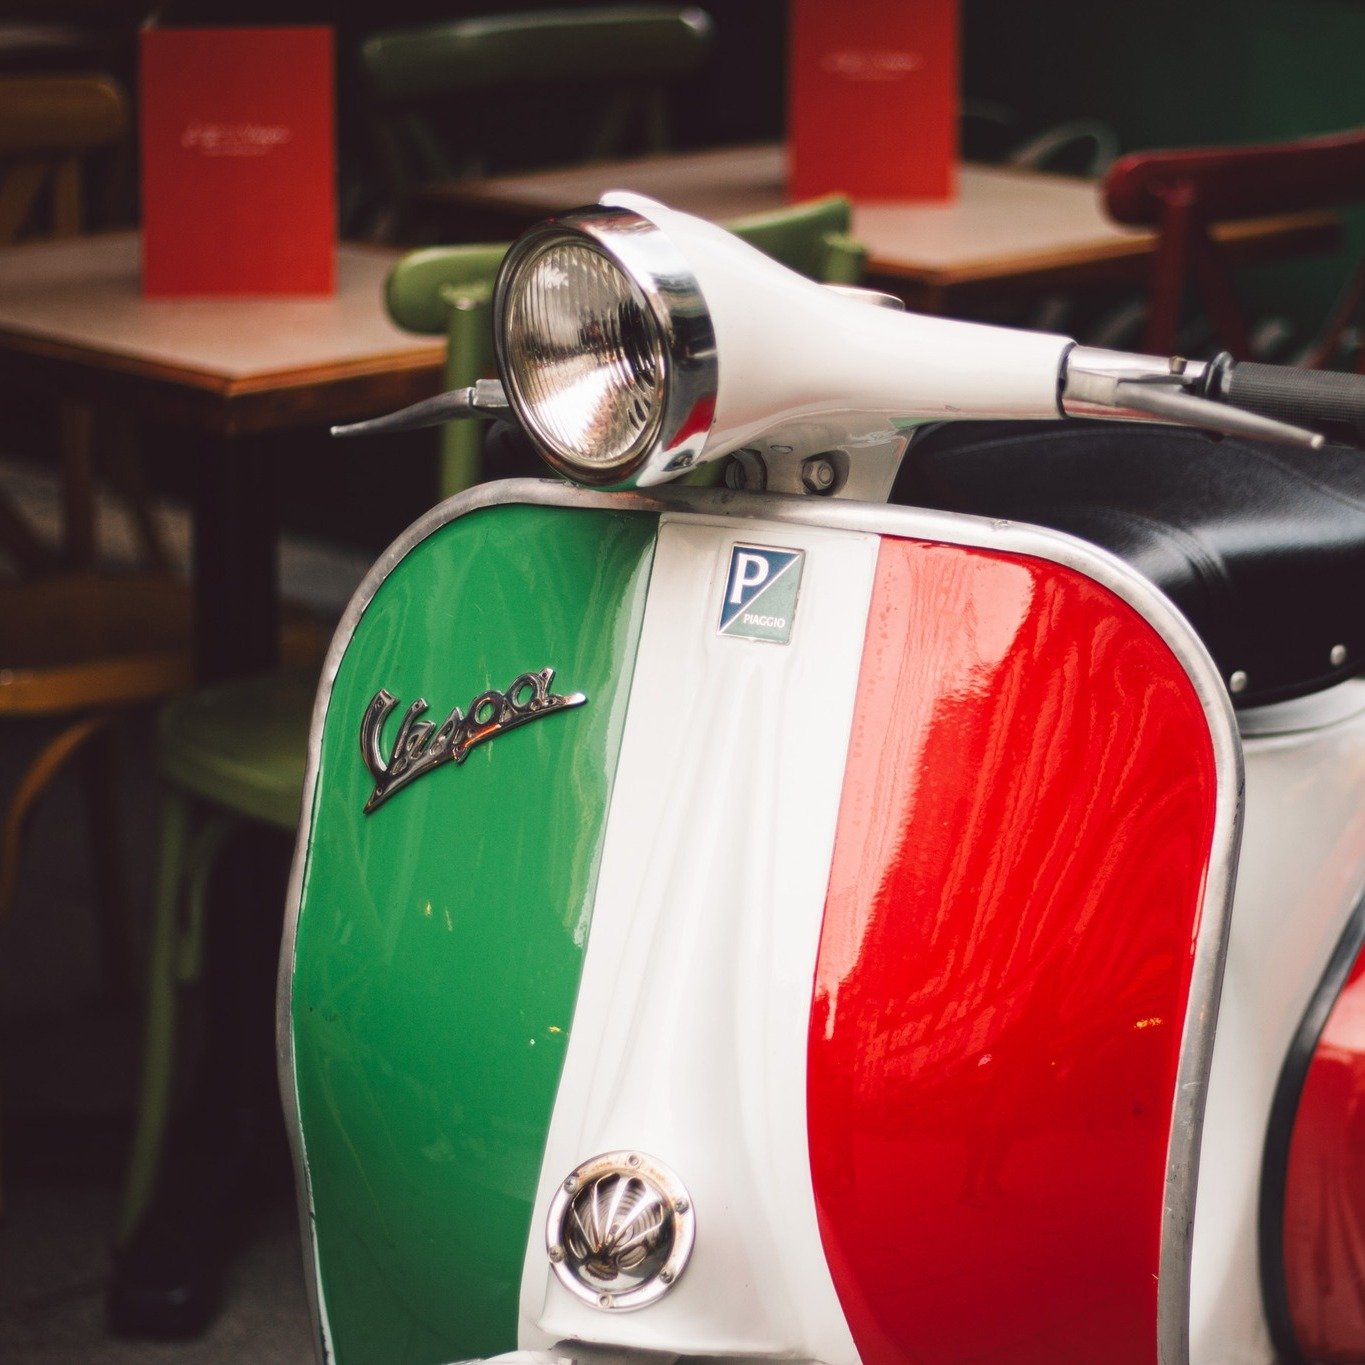 Scoot over to the perfect Instagrammable moment at our restaurant! 🍽️

Our iconic Vespa, proudly parked at the front, is more than a ride&mdash;it's a symbol of style and sophistication.

📸 Have you captured your moment on our Vespa yet?

Share the